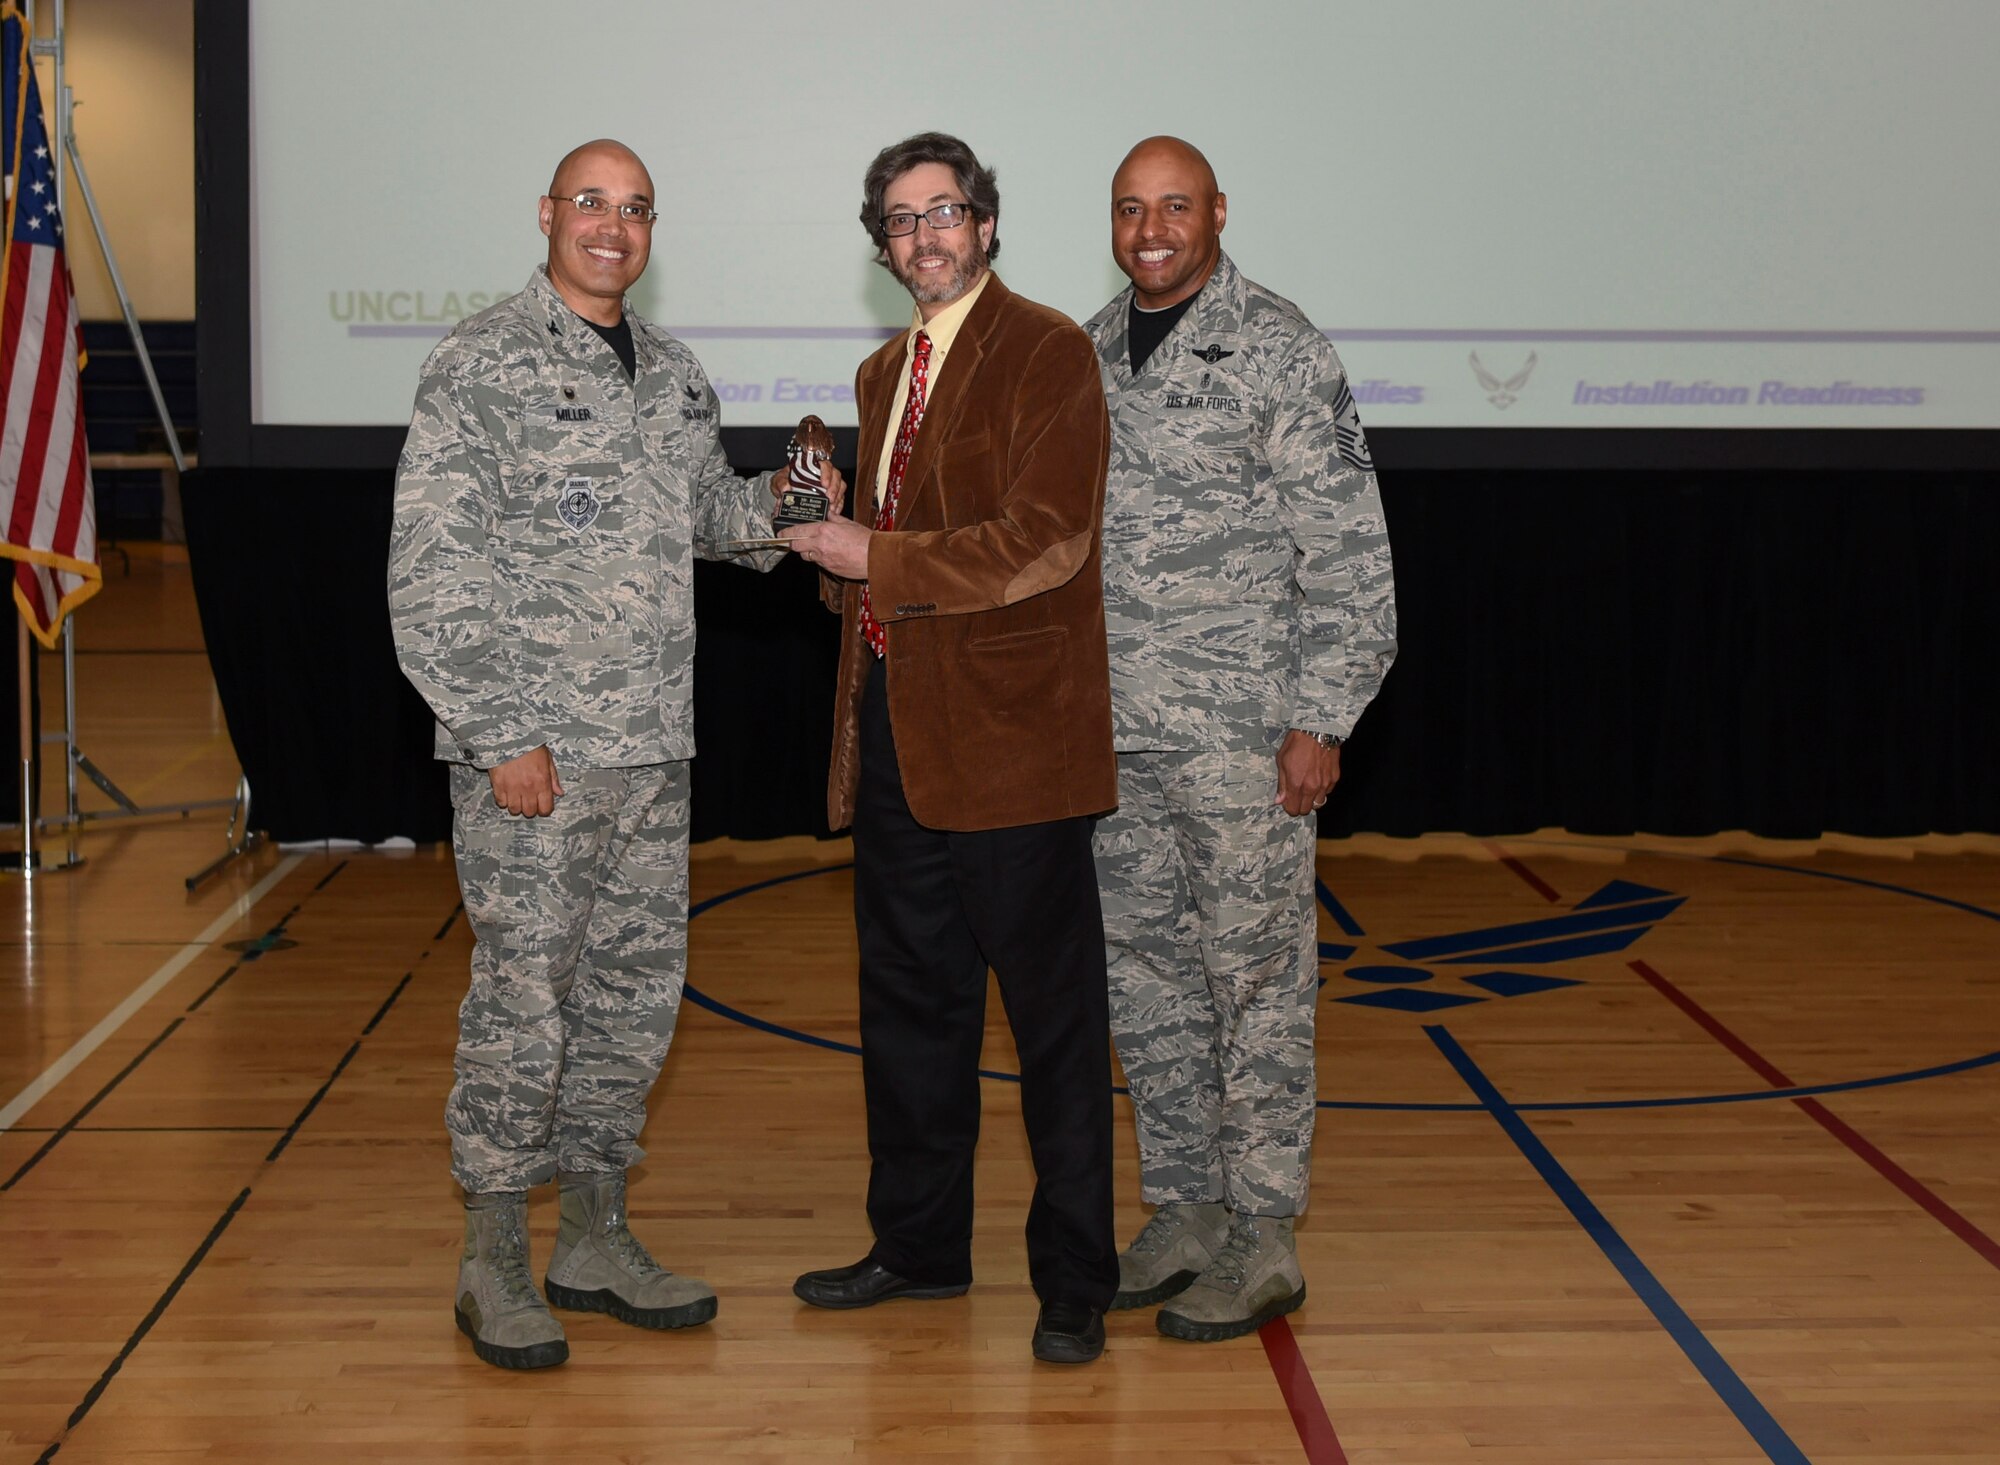 Ronn Greengas, 460th Force Support Squadron unit program coordinator, receives the Category I Non-Supervisory Civilian of the Quarter Award May 19, 2017, on Buckley Air Force Base, Colo.  Awards were given to the Team Buckley members who showed dedication, hard work and exceeded their supervisor’s expectations. (U.S. Air Force photo by Airman 1st Class Holden S. Faul/ Released)